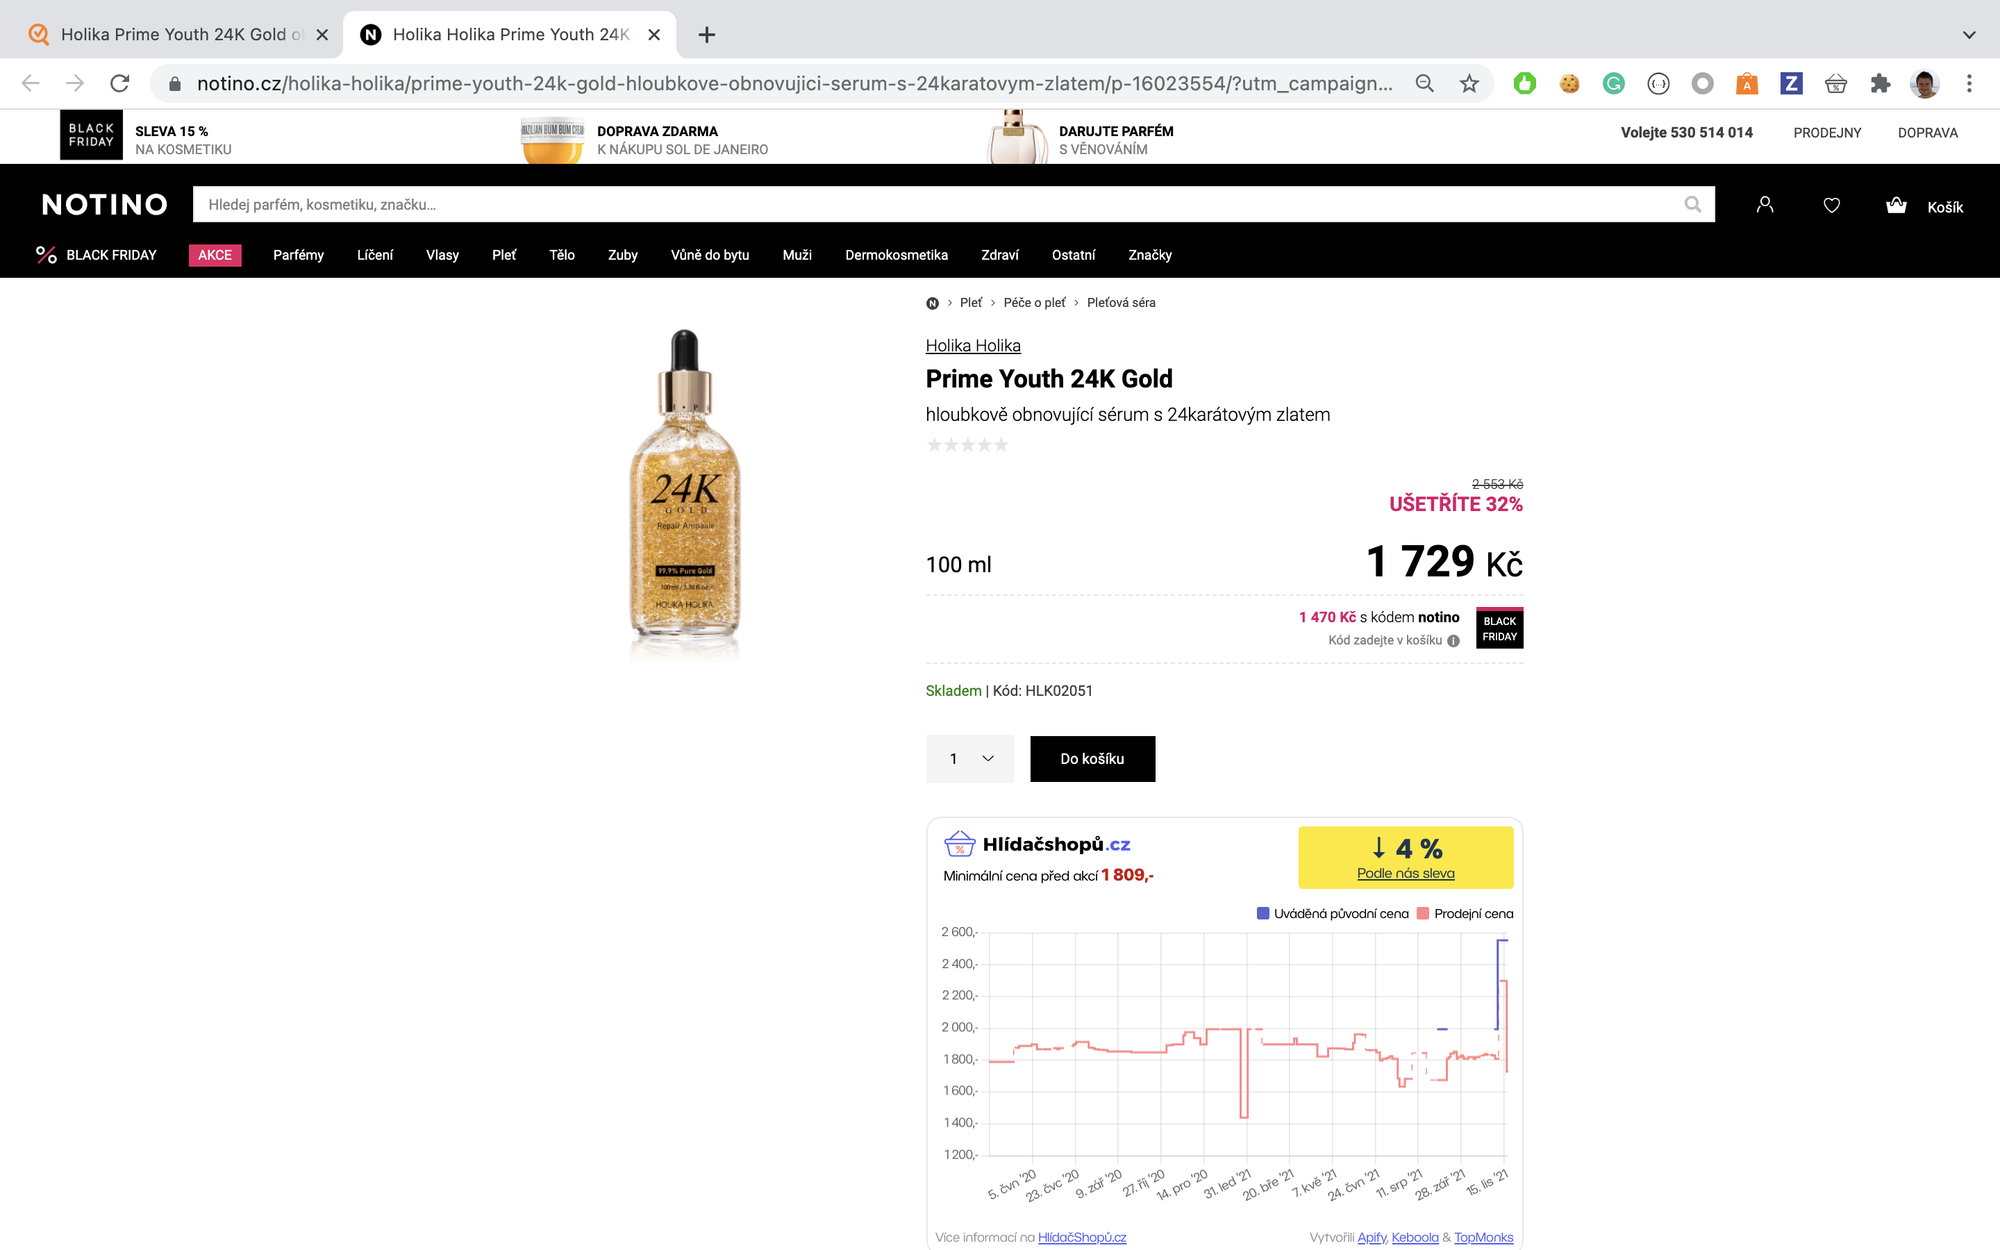 screenshot of a face serum on sale at notino.cz from 2,553 CZK to 1,729 CZK